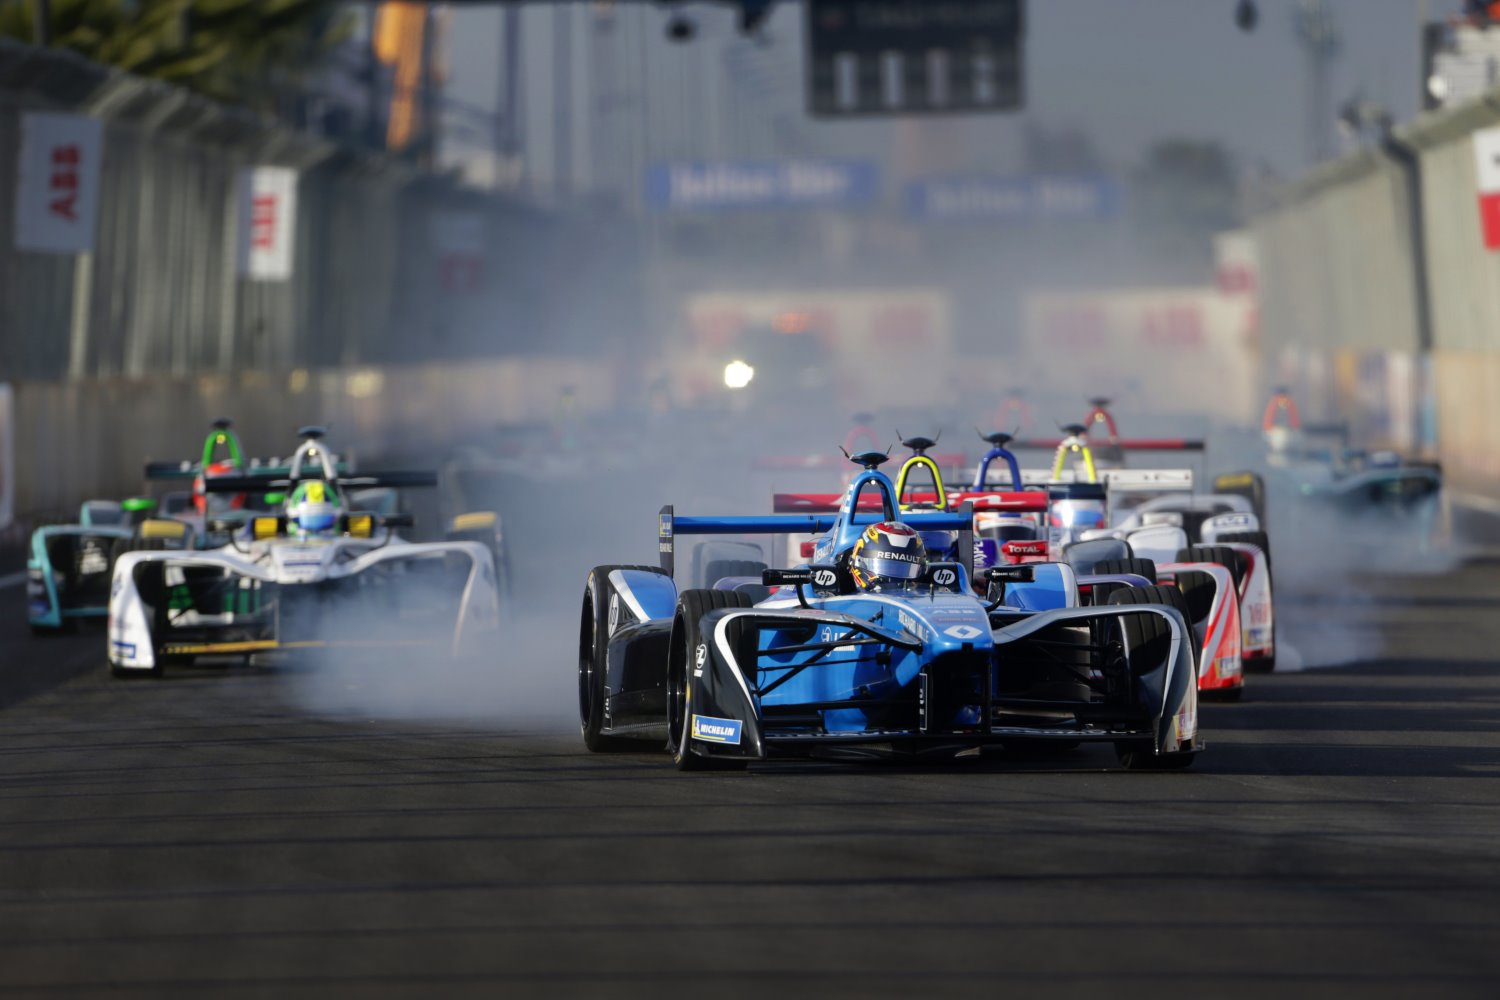 Formula E is flush with money because manufacturers are swarming in for R&D purposes. Drivers win not on skill, but on how good their battery is and how the engineers control the pace to save power